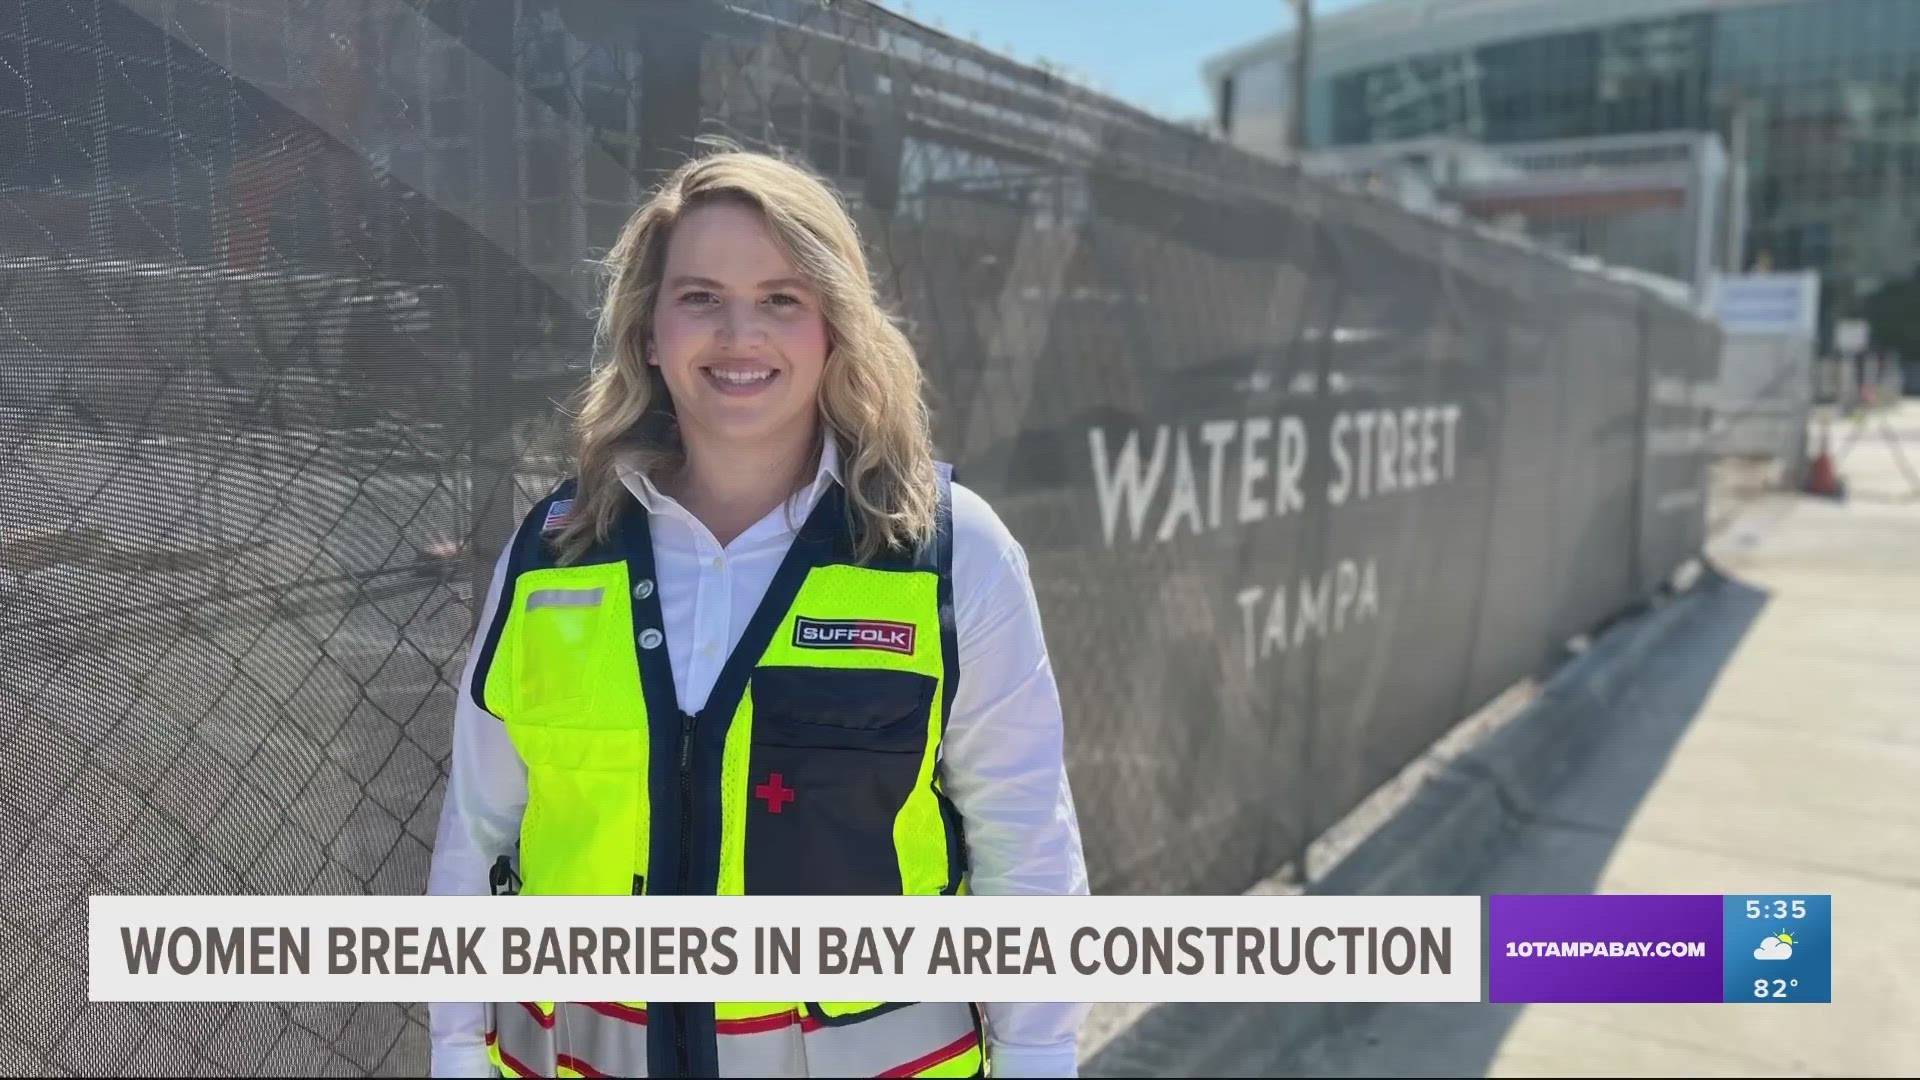 With development happening throughout the Tampa Bay area, more women are breaking into the construction industry which is known to be male-dominated.